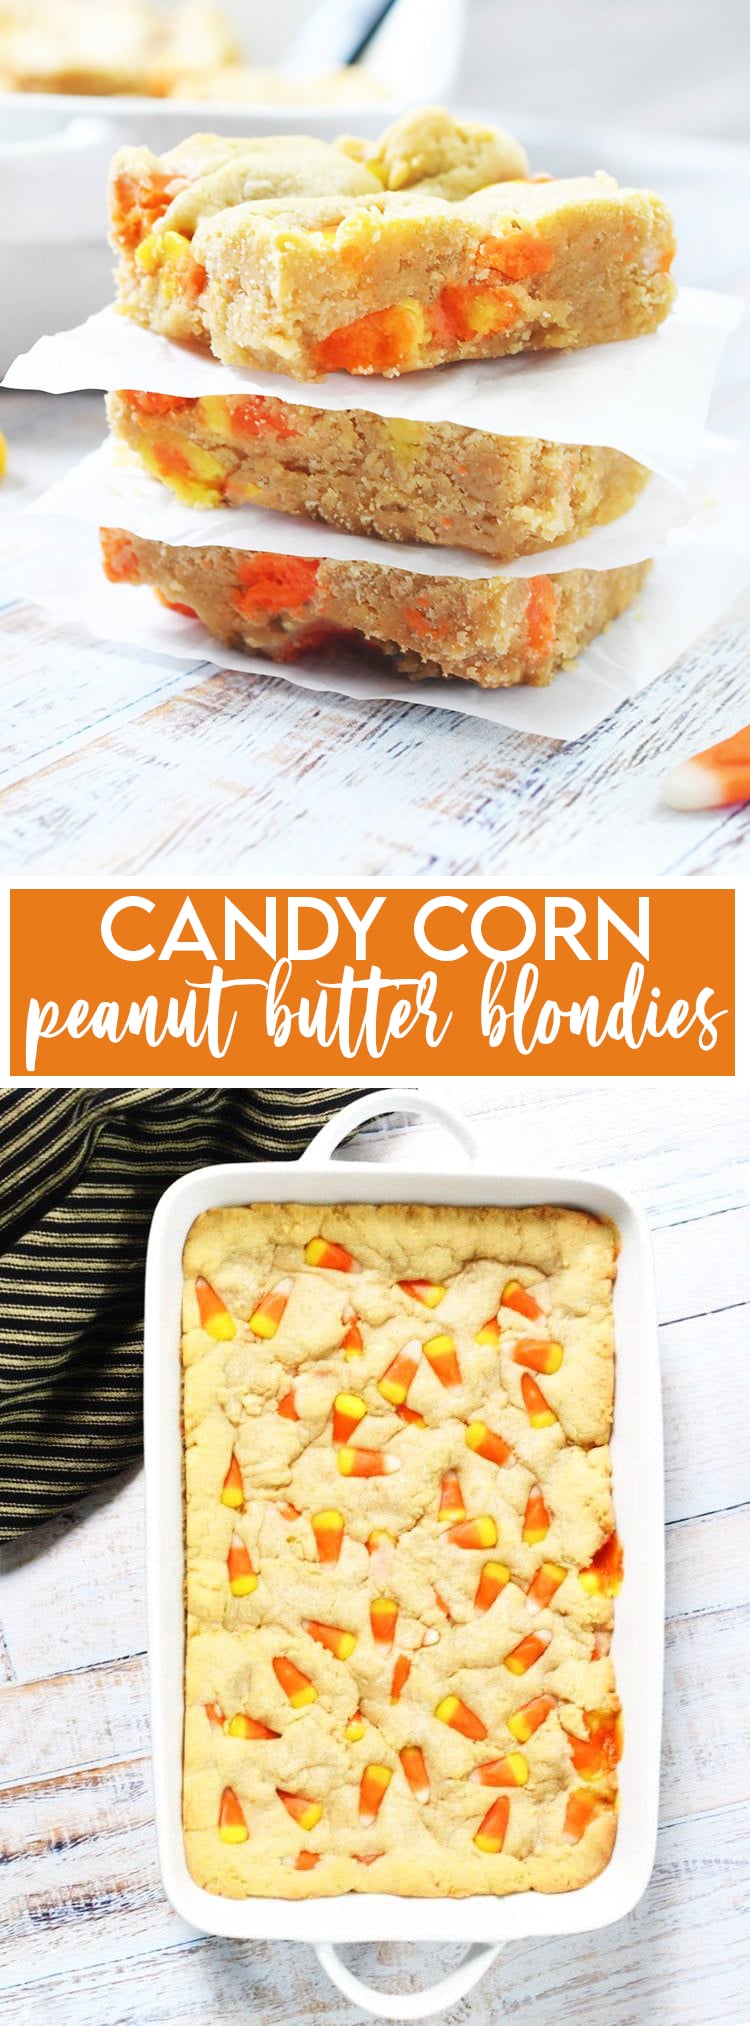 Cany corn peanut butter blondies in a baking dish with title card overlay with same text.